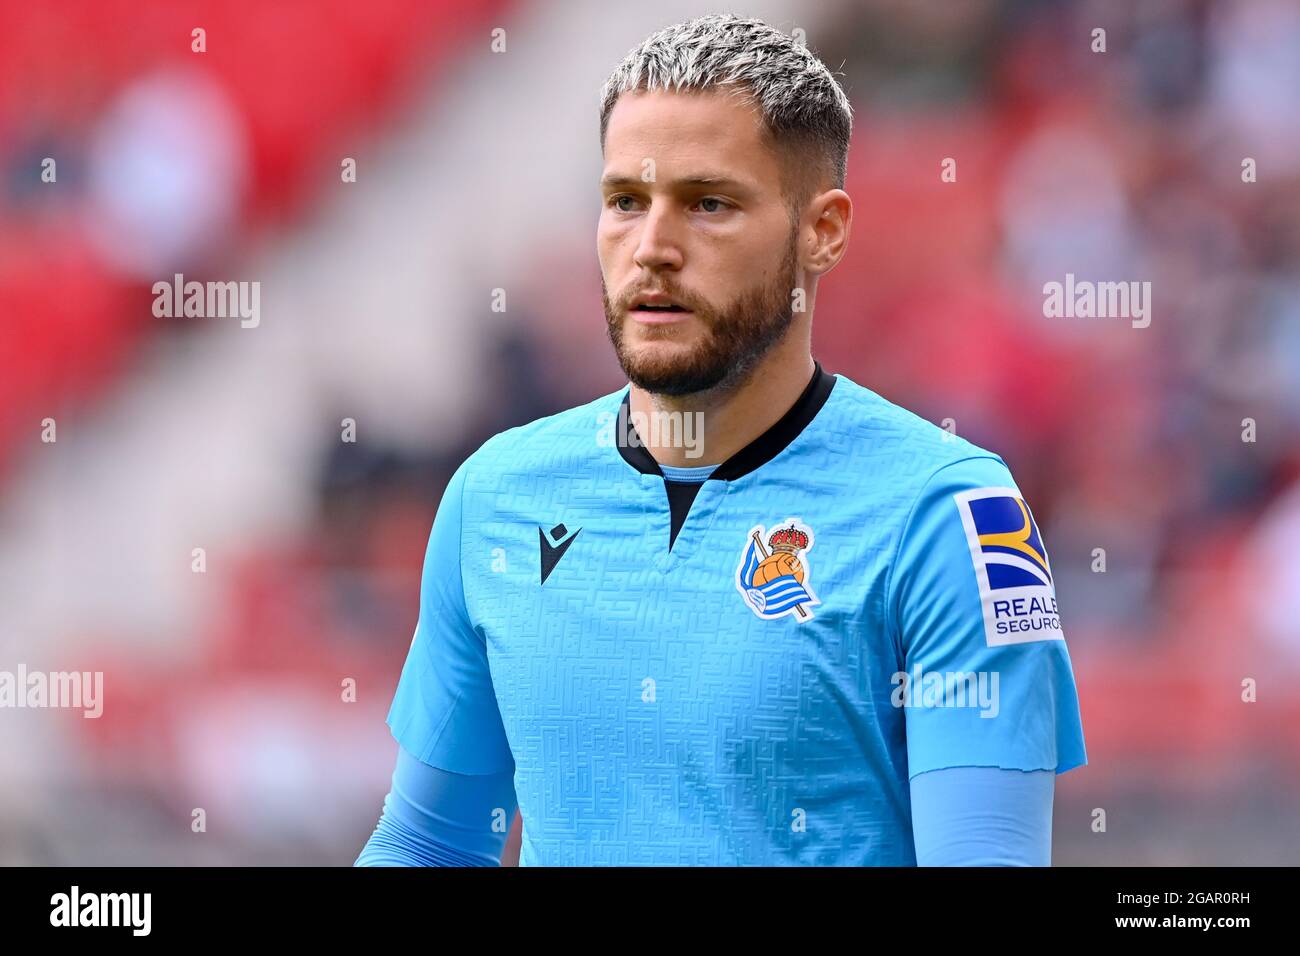 ALKMAAR, NETHERLANDS - JULY 31: Goalkeeper Alejandro Remiro of Real Sociedad during the Pre Season Friendly match between AZ and Real Sociedad at the AFAS Stadion on July 31, 2021 in Alkmaar, Netherlands (Photo by Patrick Goosen/Orange Pictures) Stock Photo